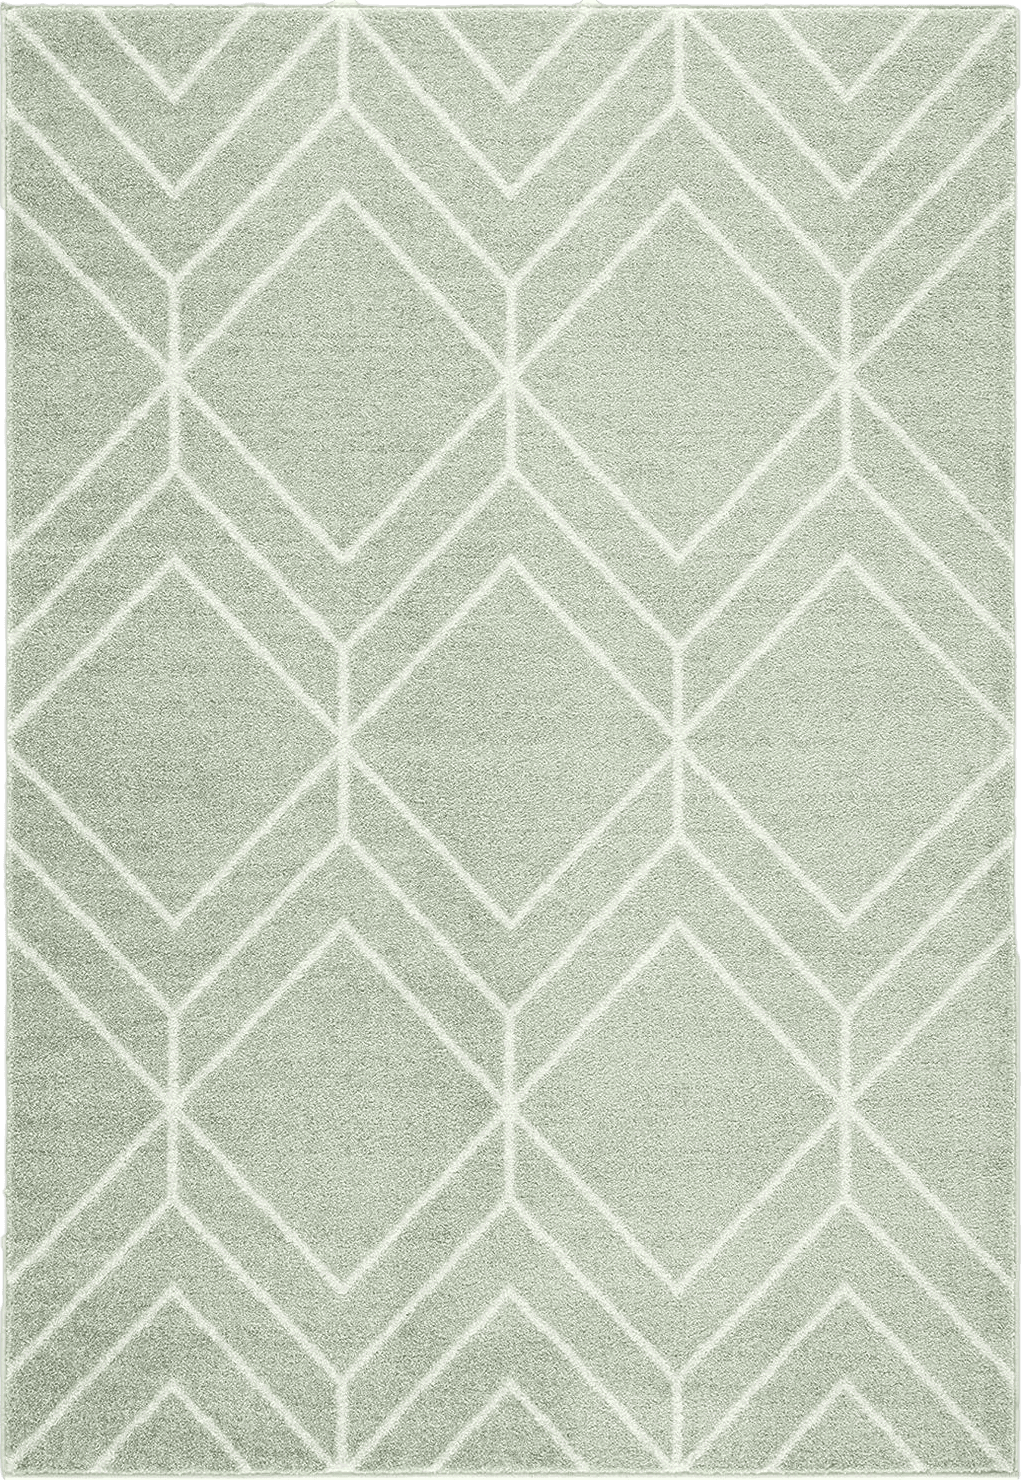 SAFAVIEH Adirondack Collection Area Rug - 8' x 10', Sage & Ivory, Modern Geometric Design, Non-Shedding & Easy Care, Ideal for High Traffic Areas in Living Room, Bedroom (ADR241Y)